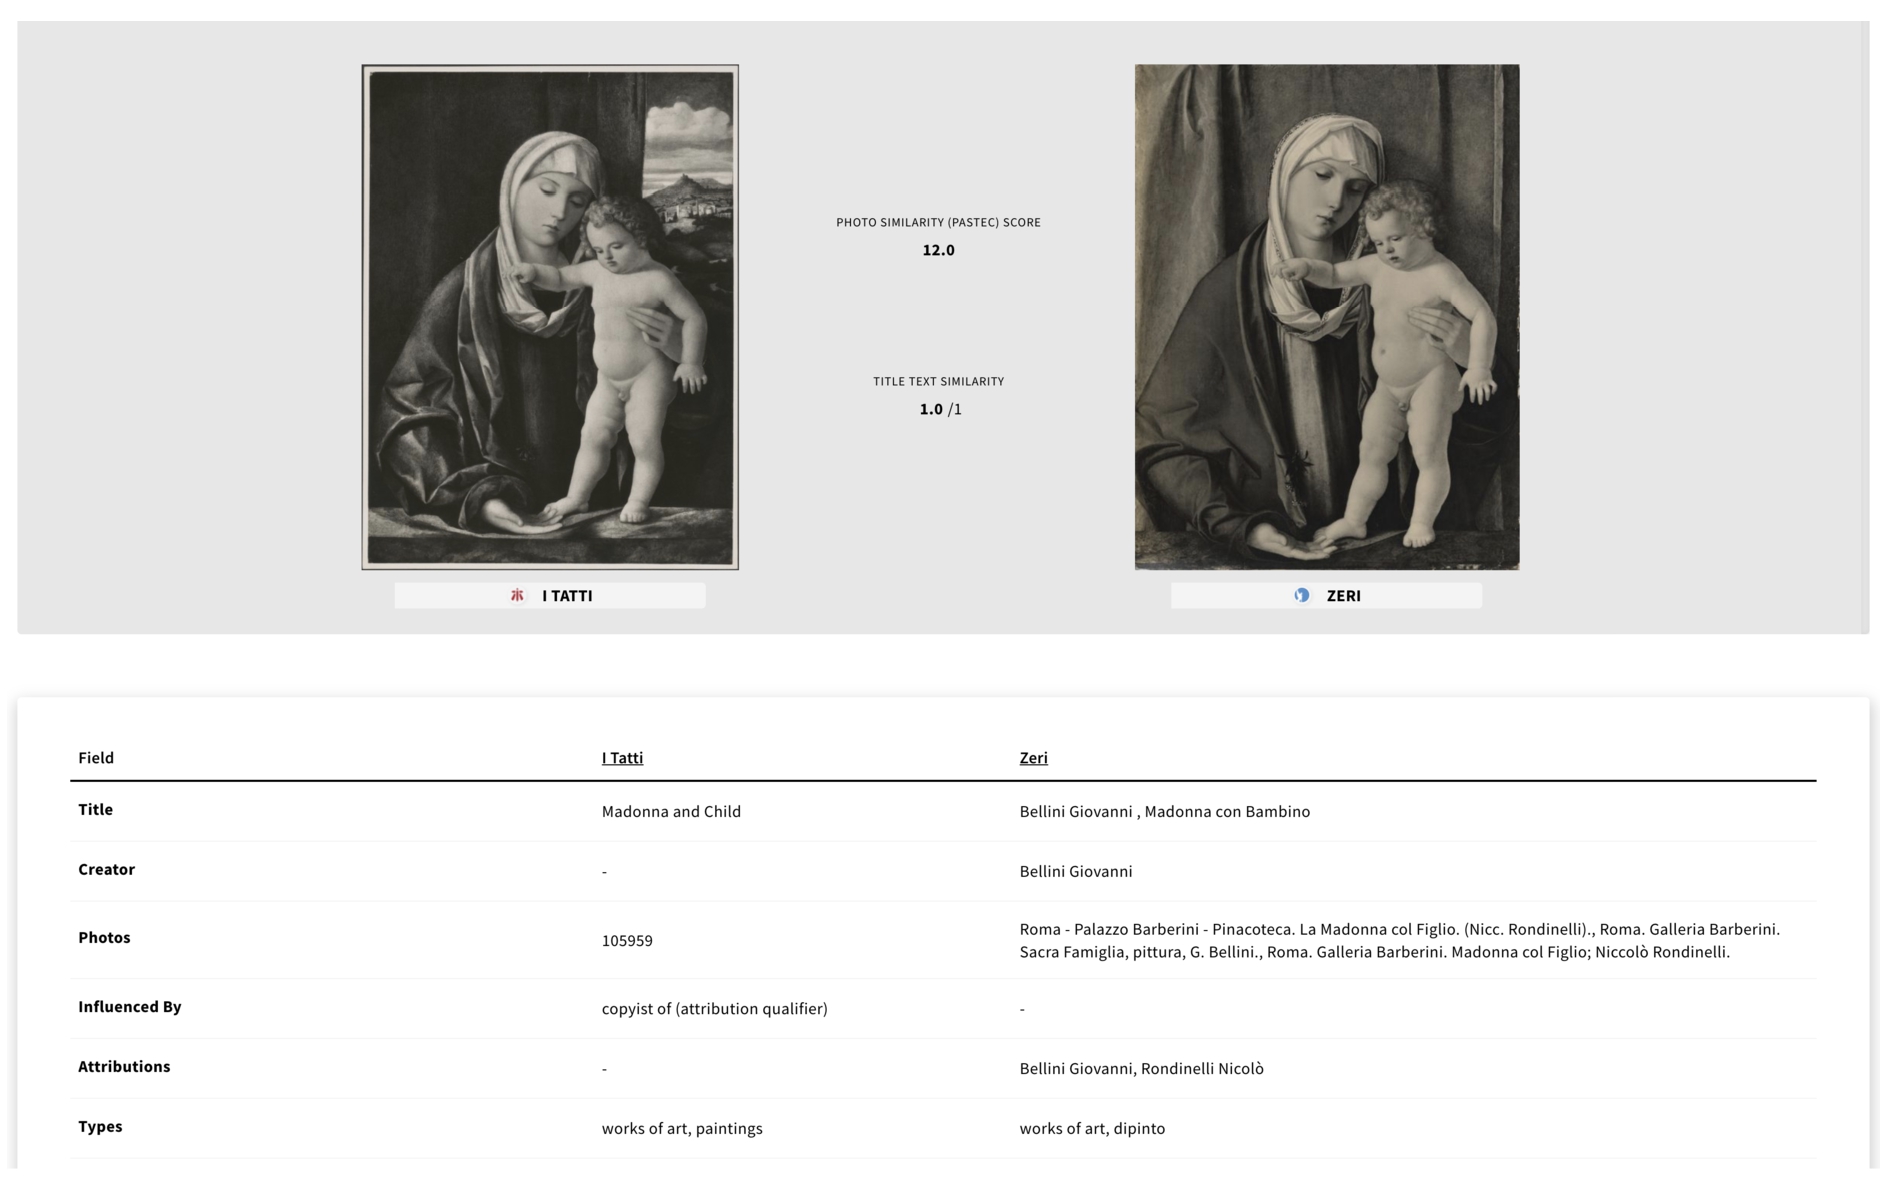 Detailed view: comparing images and metadata from Pharos collections.